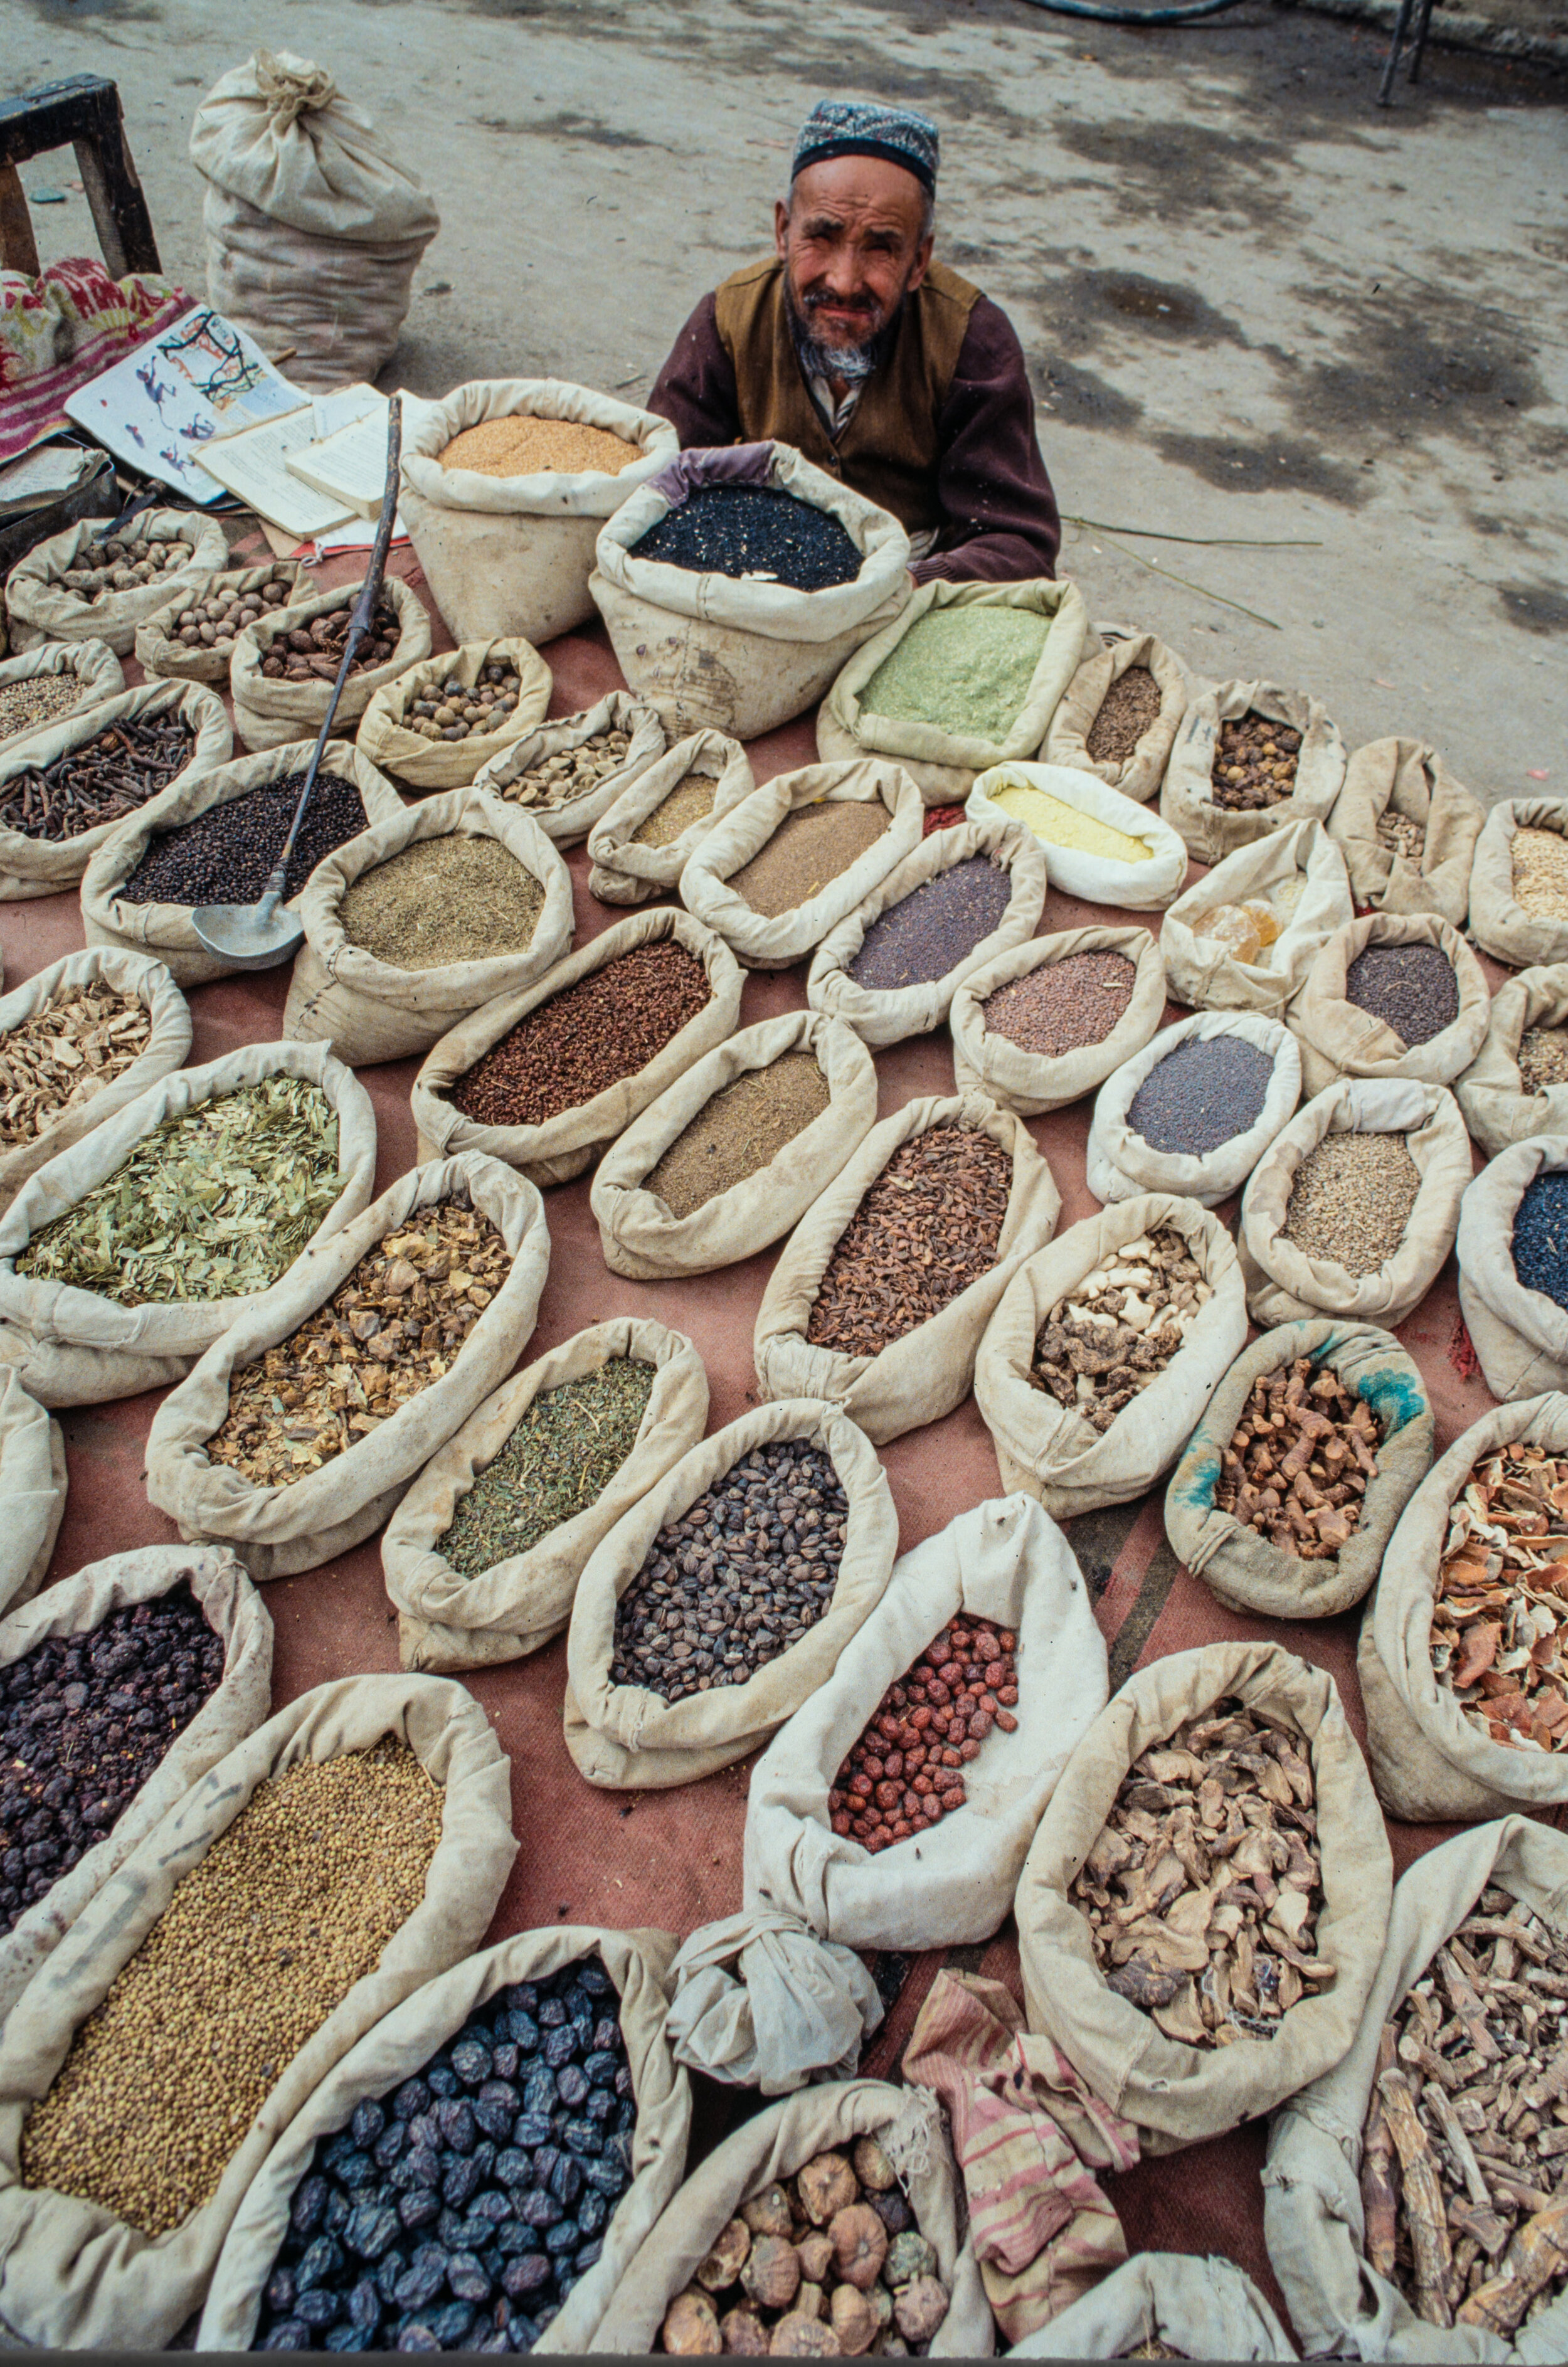  The spice man at the local bazaar. I literally purchased a one gallon plastic bag of saffron for a few dollars and brought it back to California with me.  